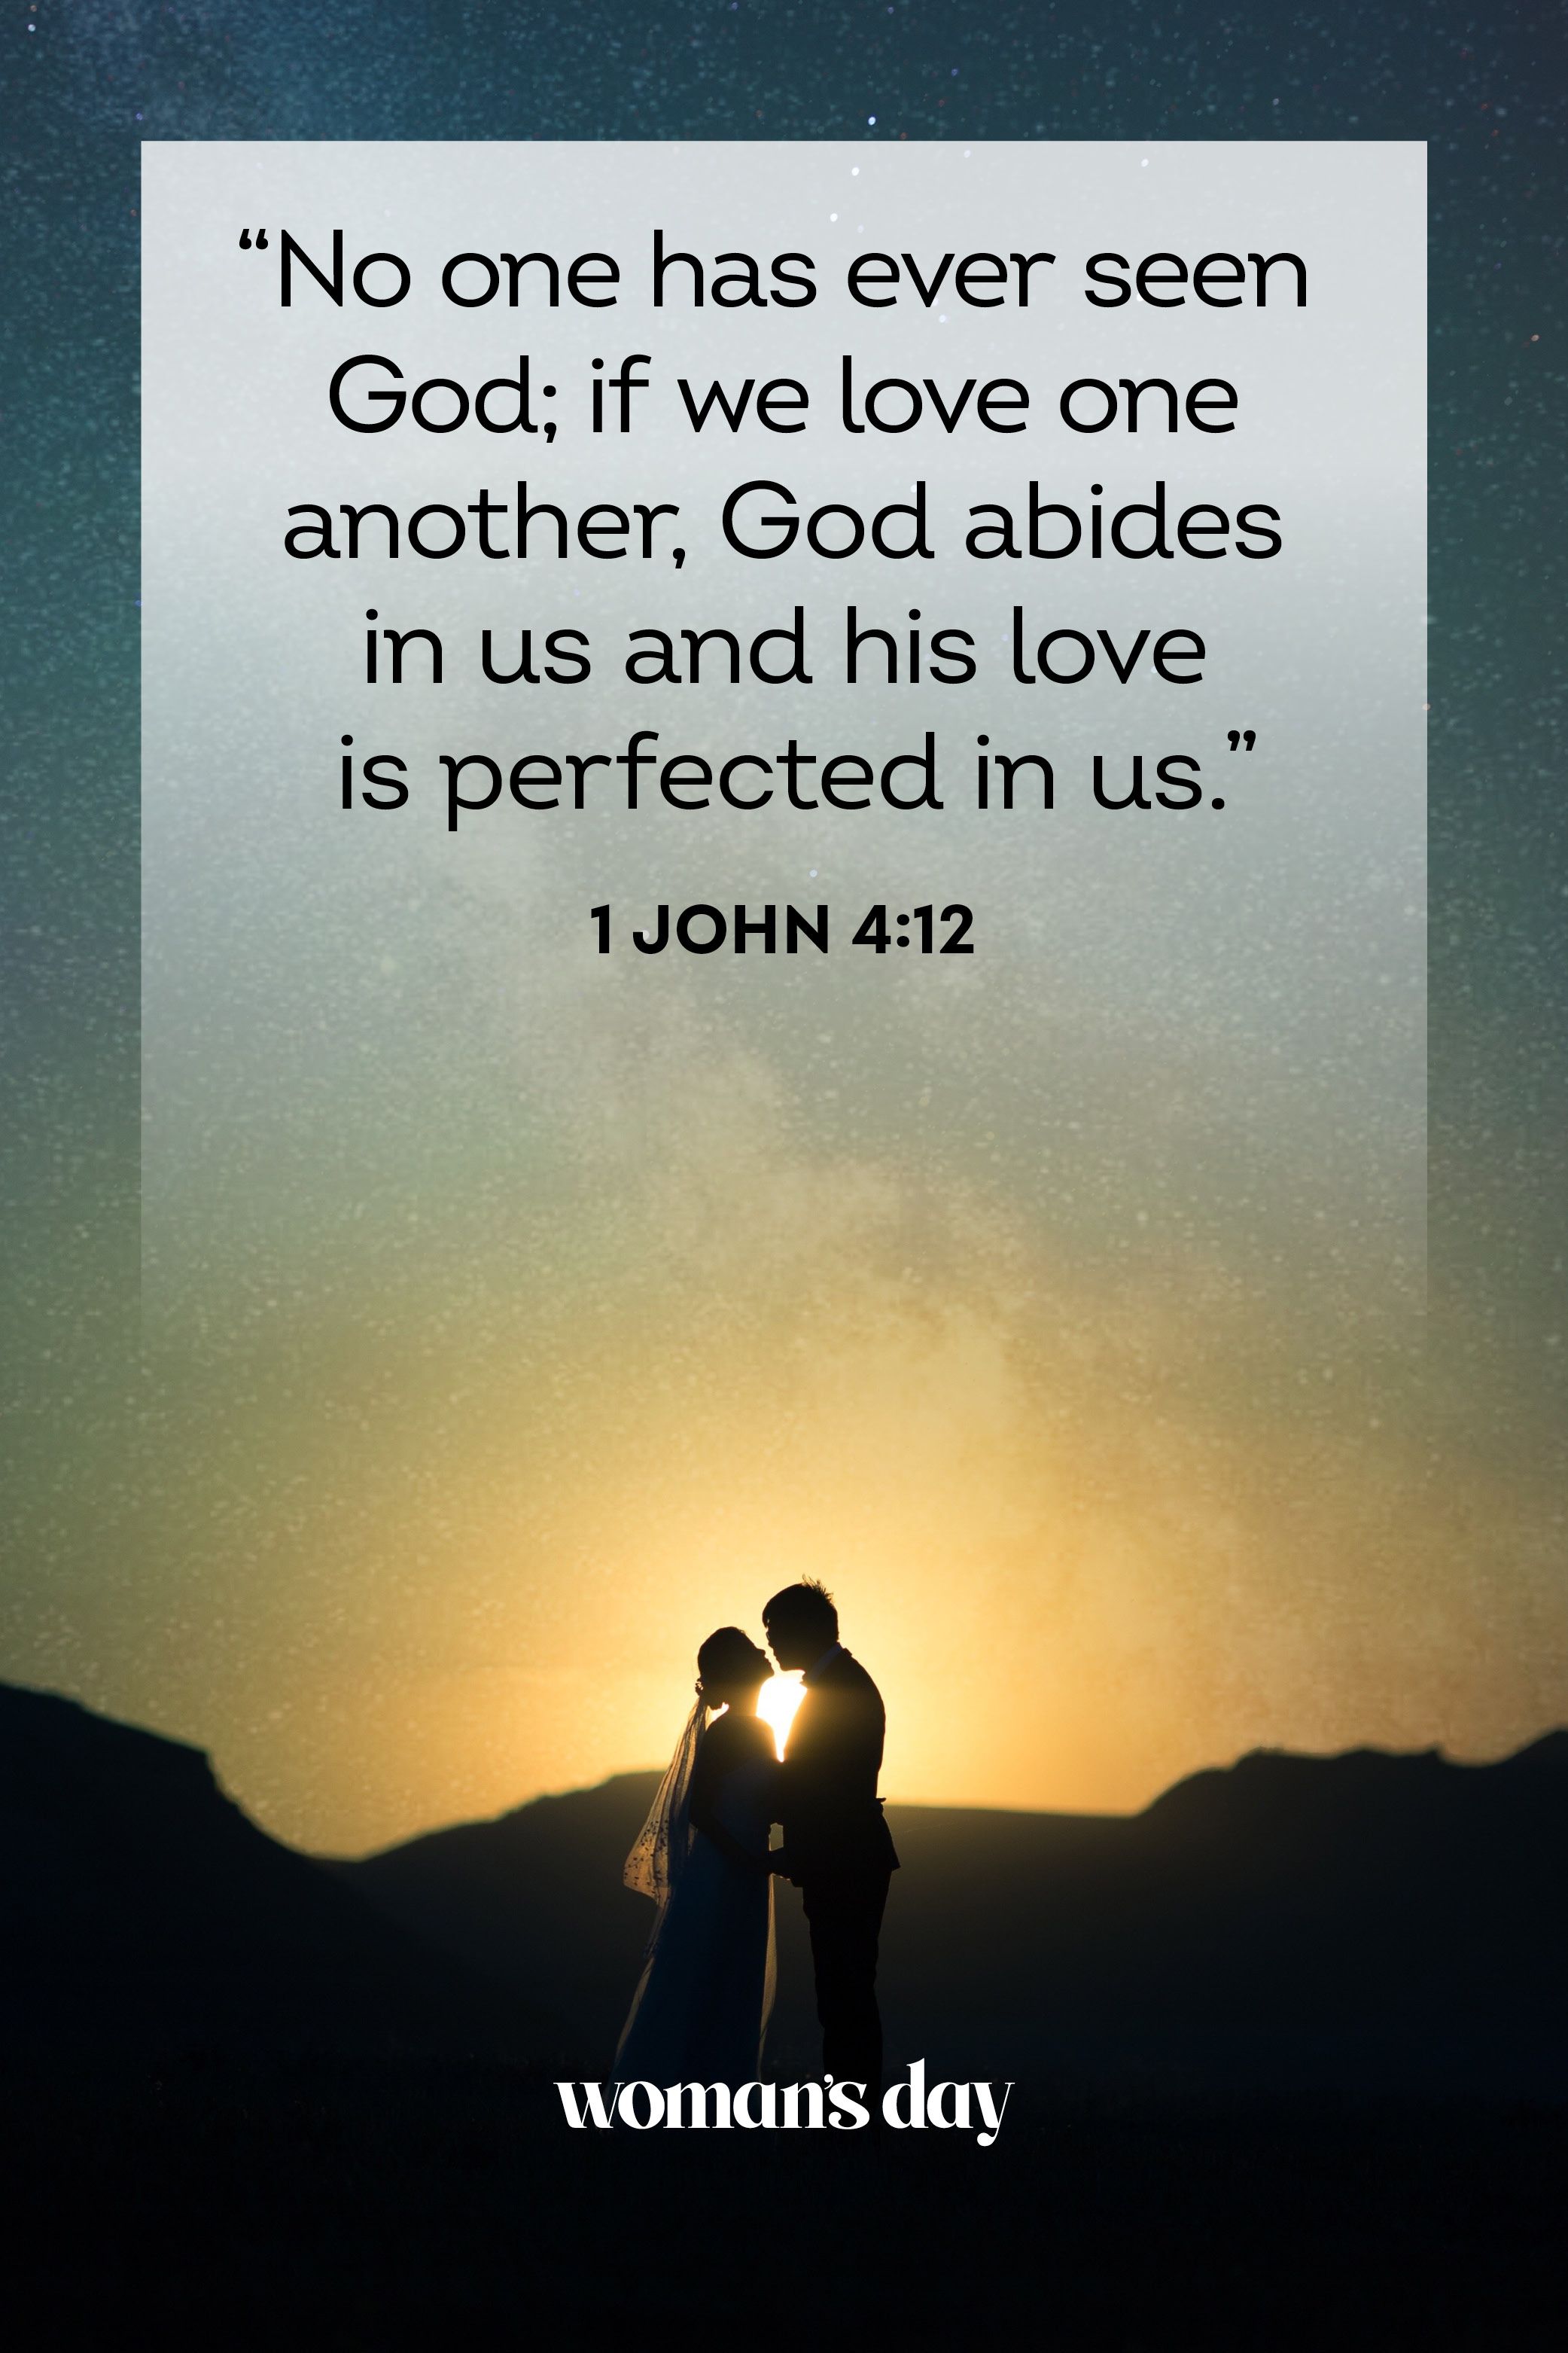 60+ Bible Verses About Love: Inspiring Scripture Quotes